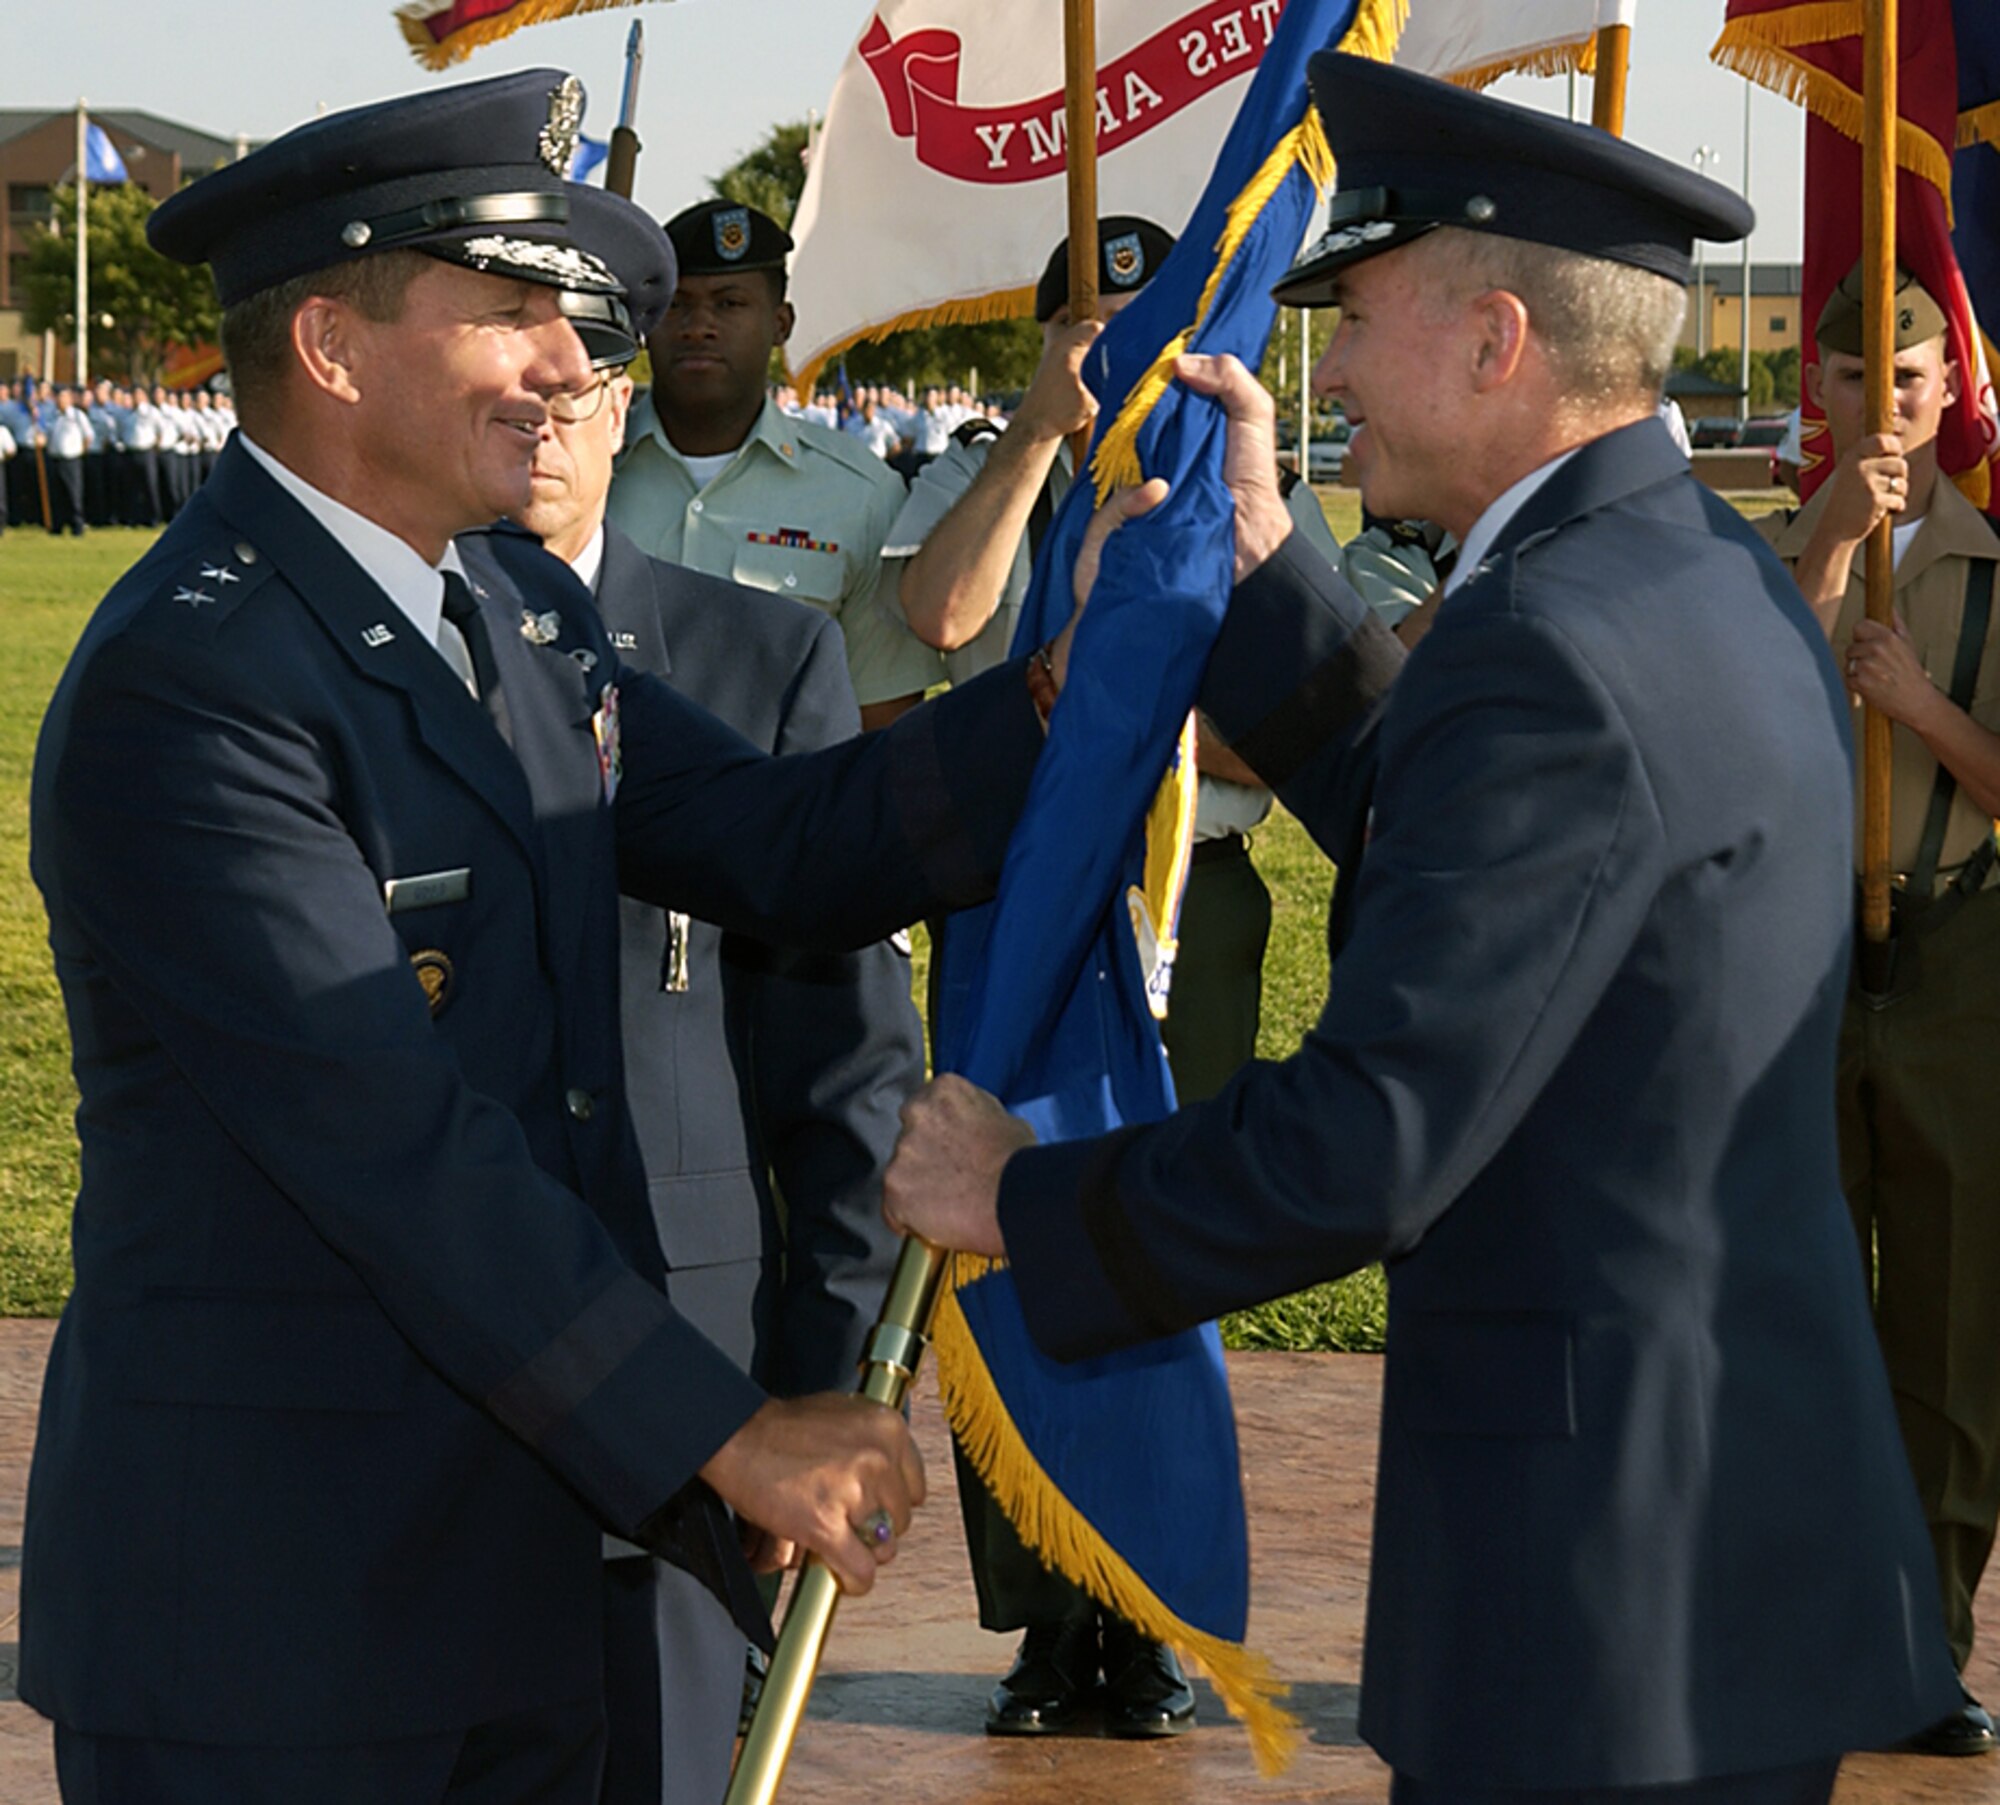 Brig. Gen. Richard Devereaux takes the flag of the 82nd Training Wing Aug. 25 from Maj. Gen. Michael Gould, 2nd Air Force commander. General Devereaux took command from Brig. Gen. James Whitmore during the early morning ceremony. (U.S. Air Force photo/Sandy Wassenmiller)